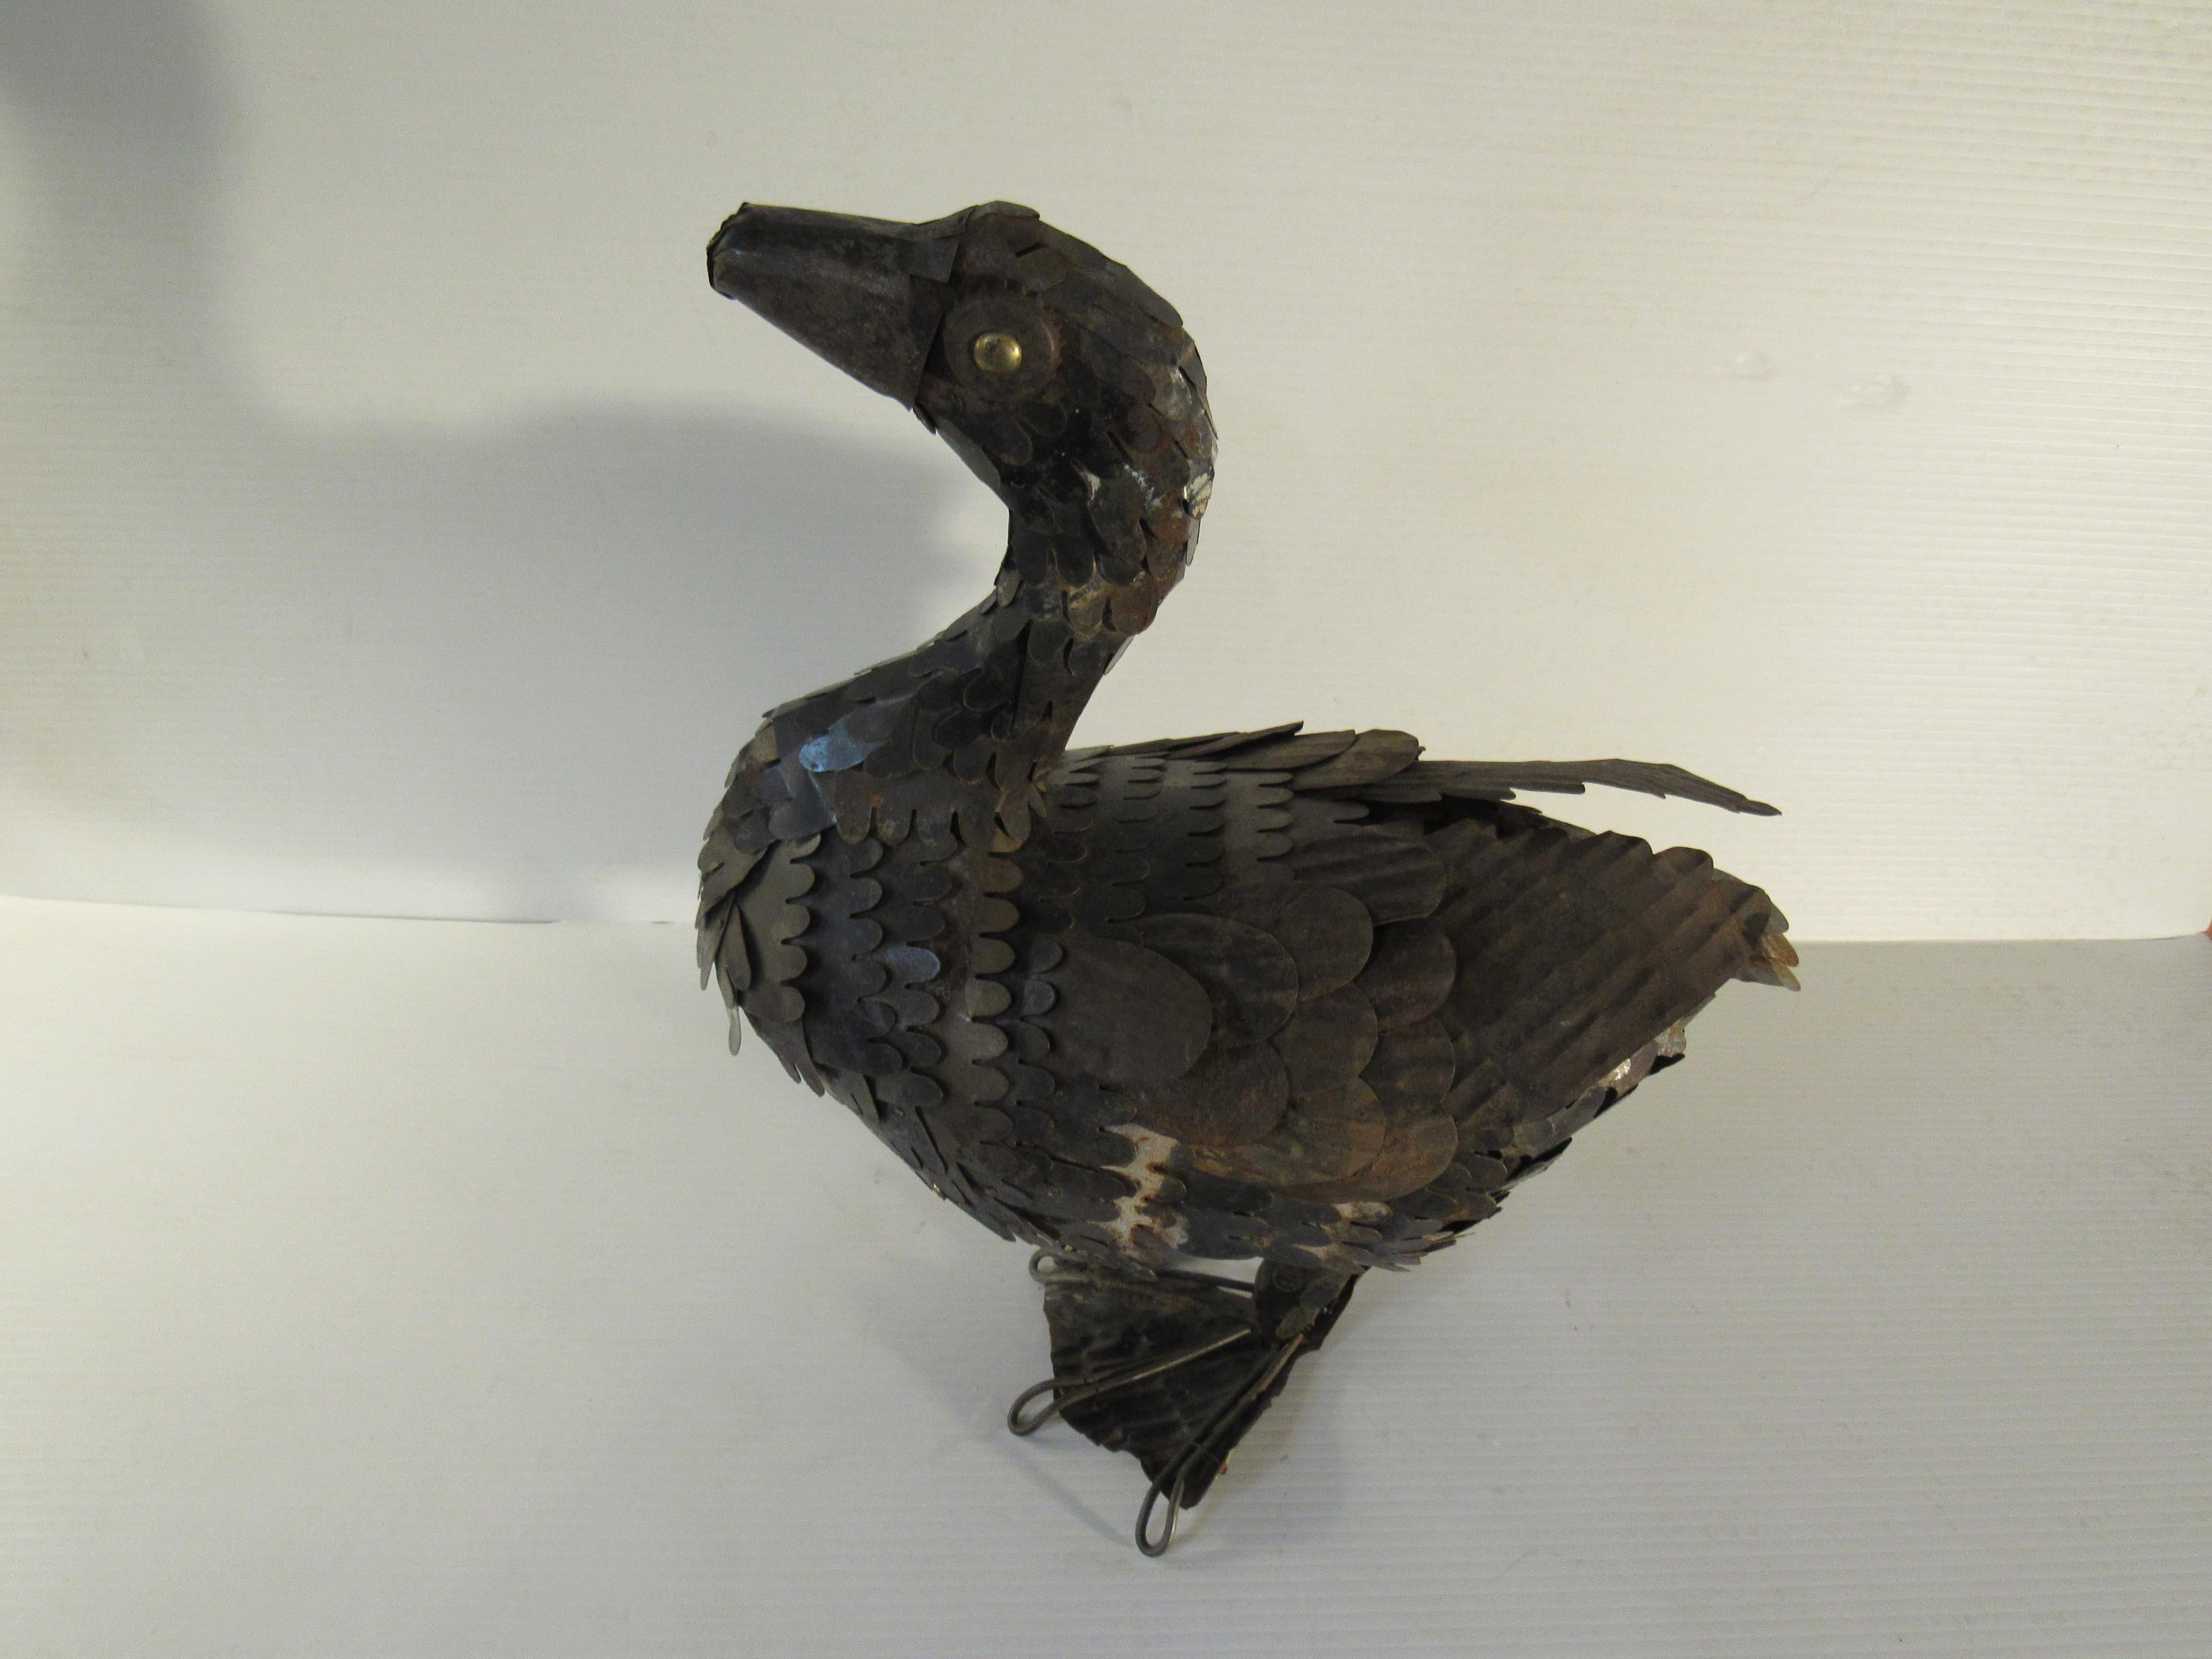 Whether it's a goose or a duck, or some other waterfowl this handmade metal bird is sure to make a splash in any space. Layers of cut and welded sheet metal give a wonderful lifelike effect to the feathers while bottlecap eyes add to the vintage